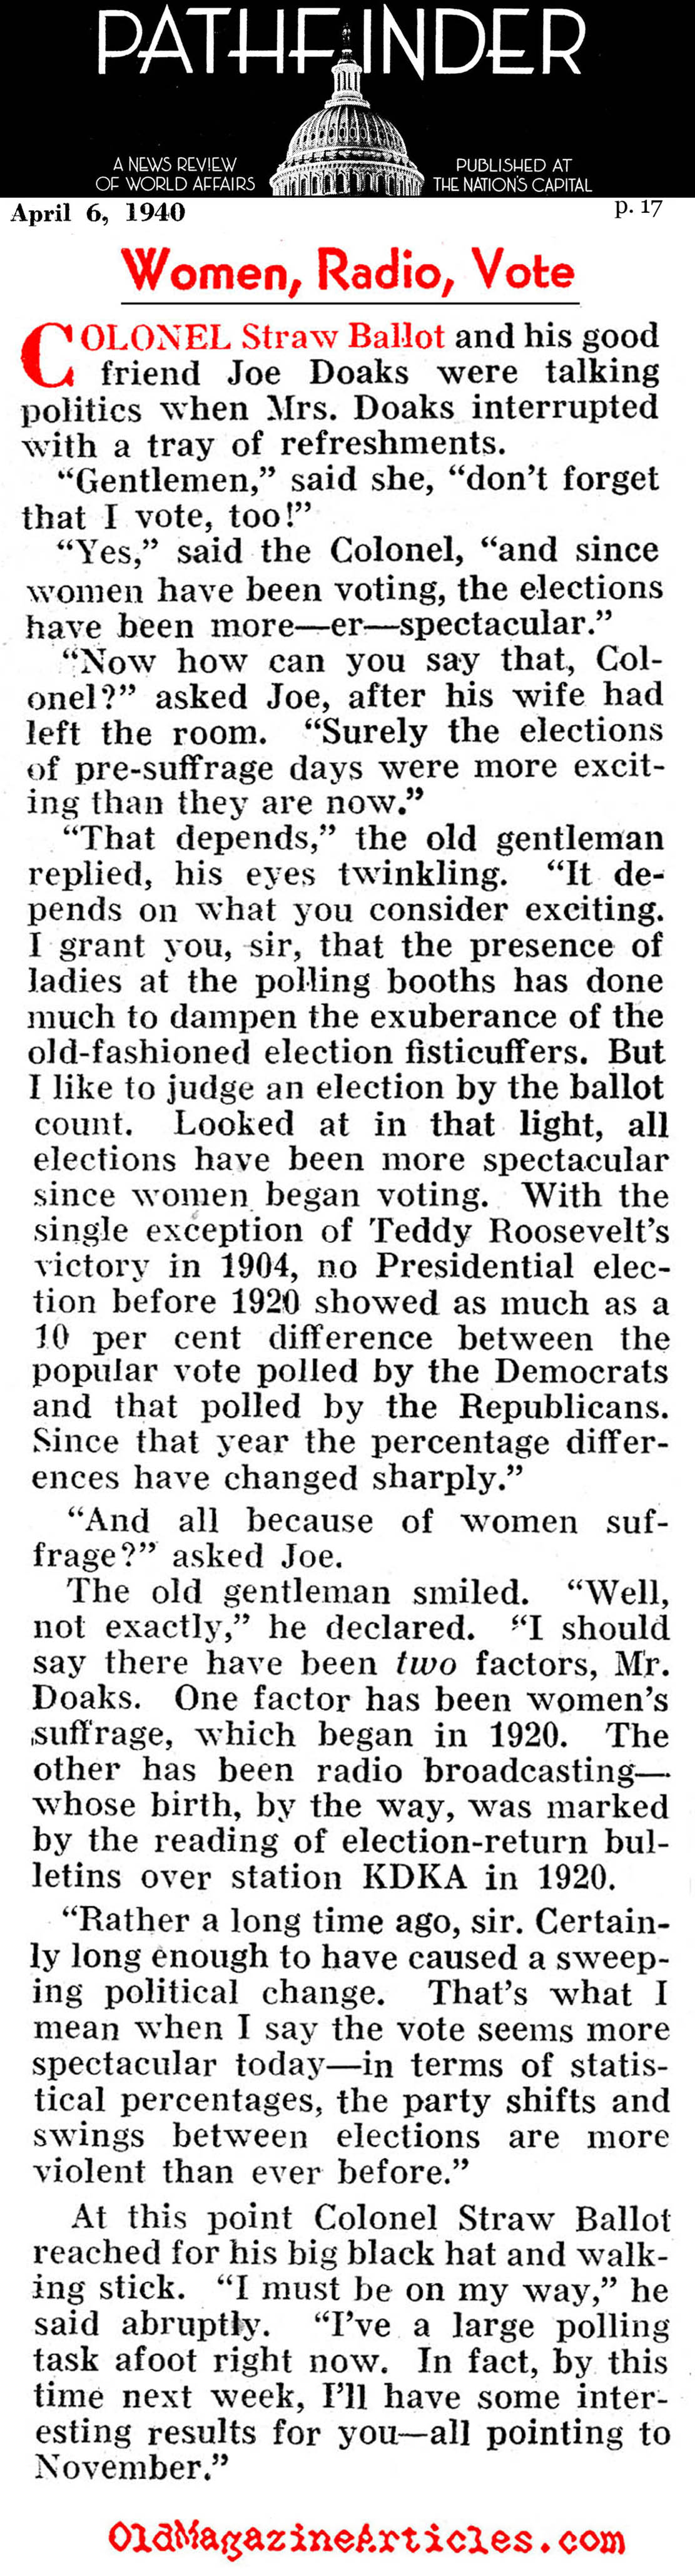 The Women Voter in Her First Five Elections (Pathfinder Magazine, 1940)